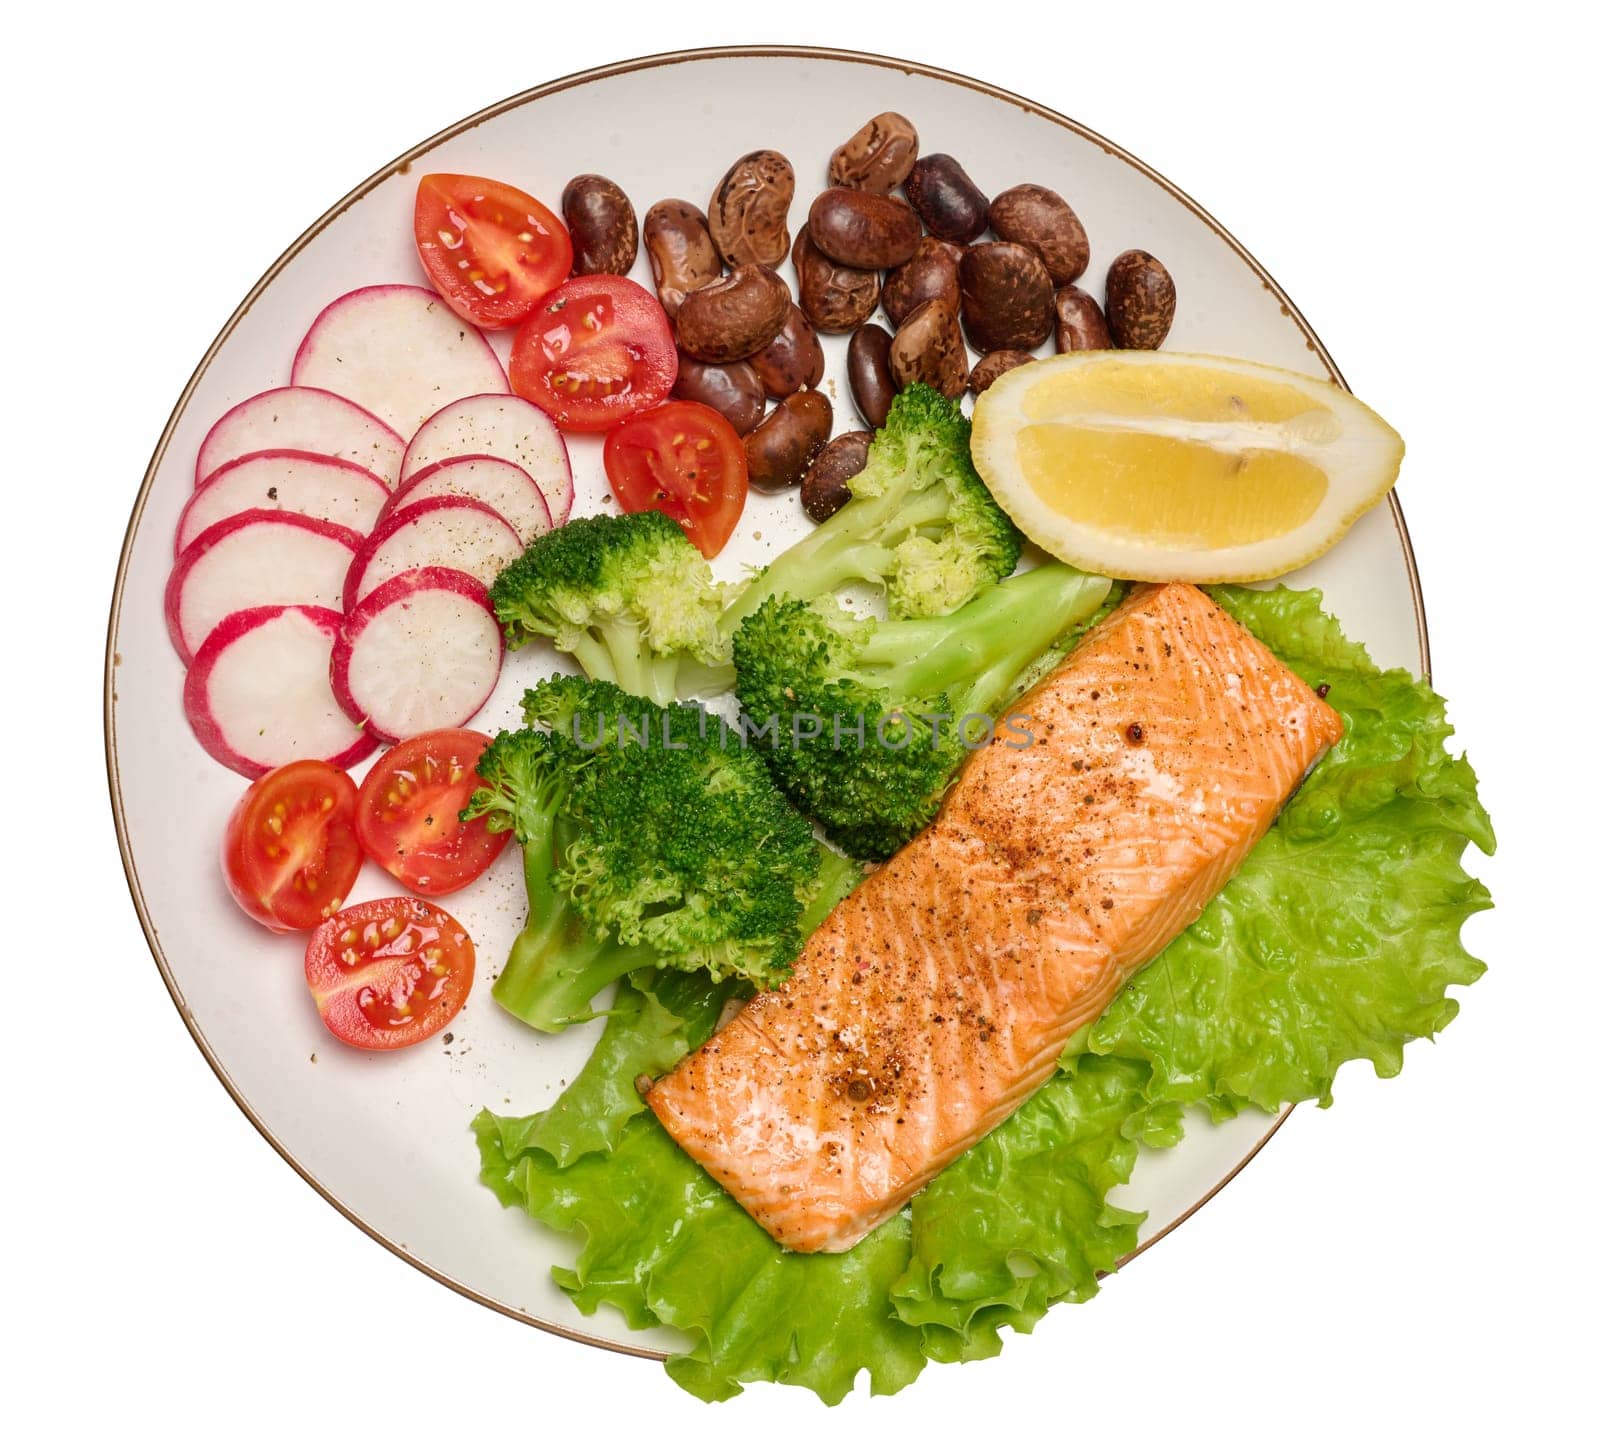 Healthy lunch with grilled trout on green lettuce, next to vegetables, tomatoes, radishes, broccoli and a portion of beans, isolated background